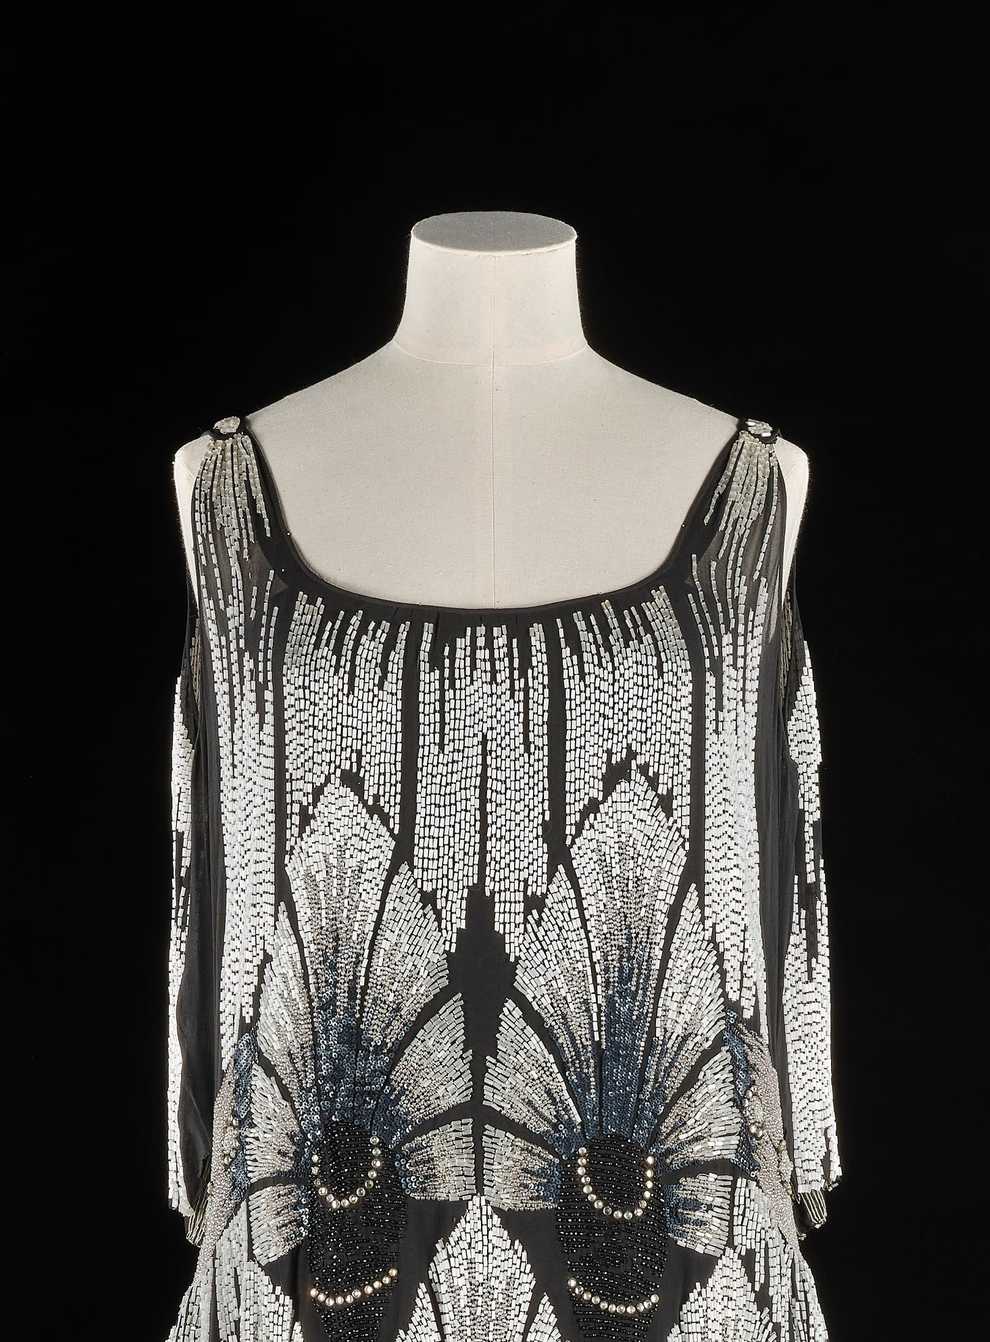 A French evening dress from 1929 (National Museums Scotland/PA)